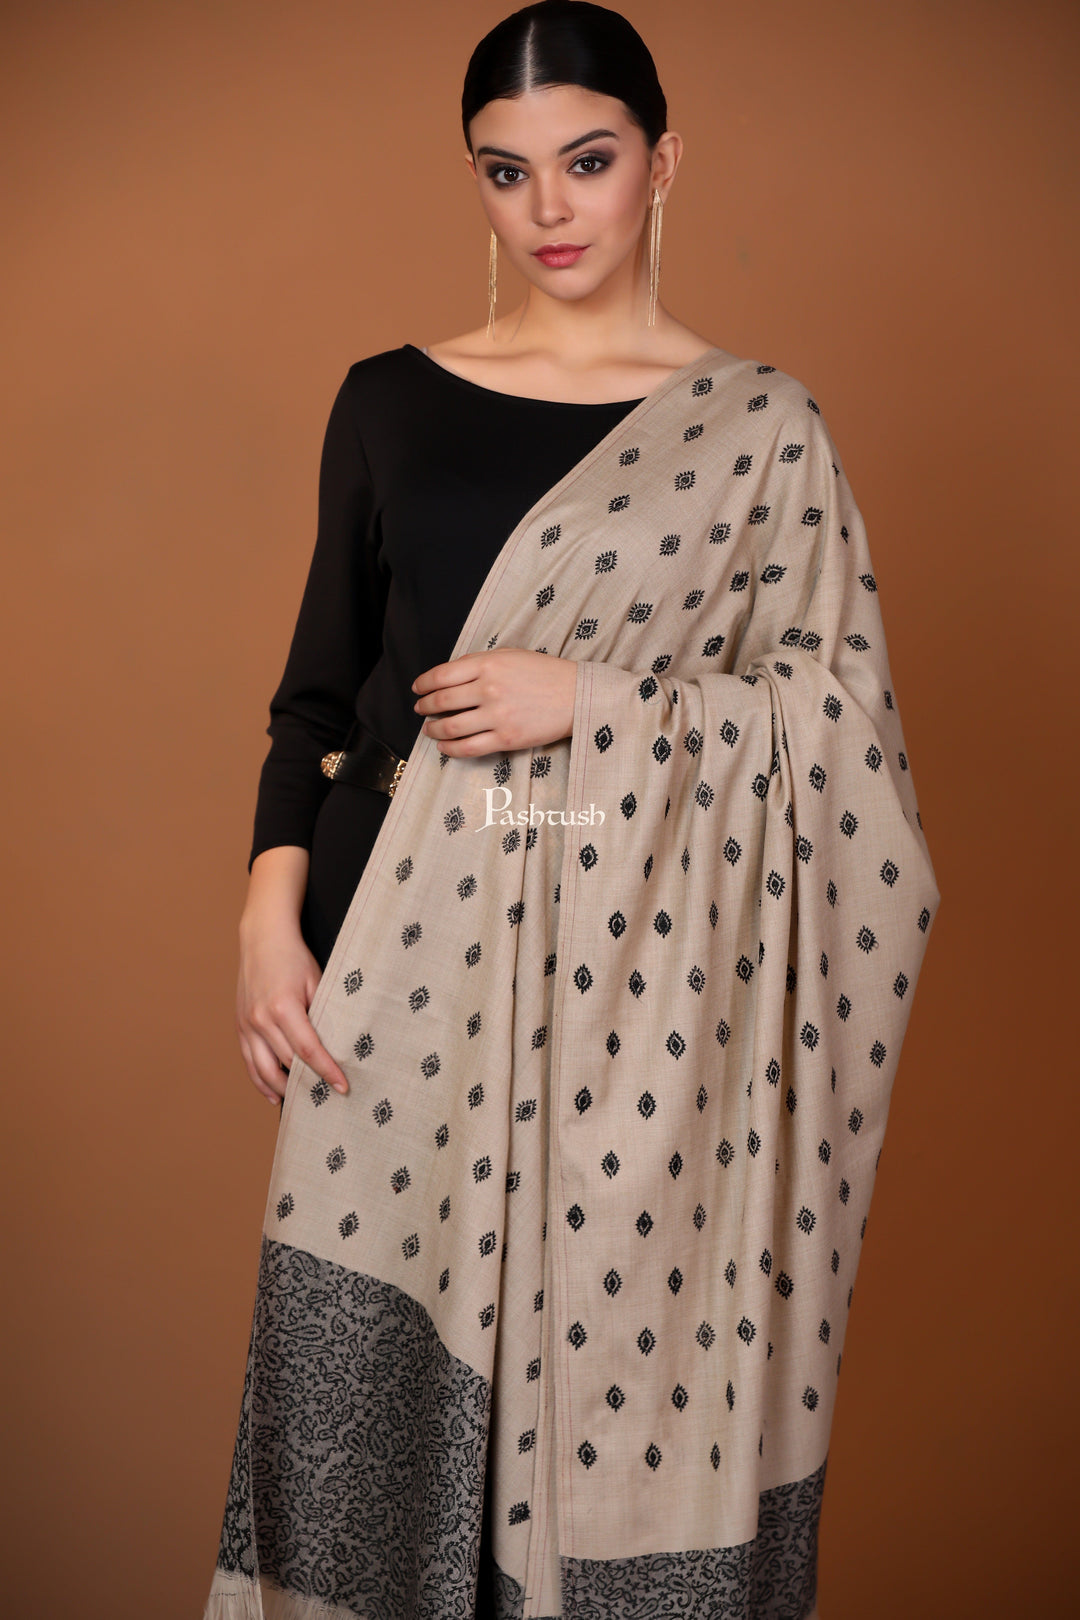 Pashtush India Gift Pack Pashtush His And Her Gift Set Of Checkered Stole And Embroidery Shawl With Premium Gift Box Packaging, Black and Beige